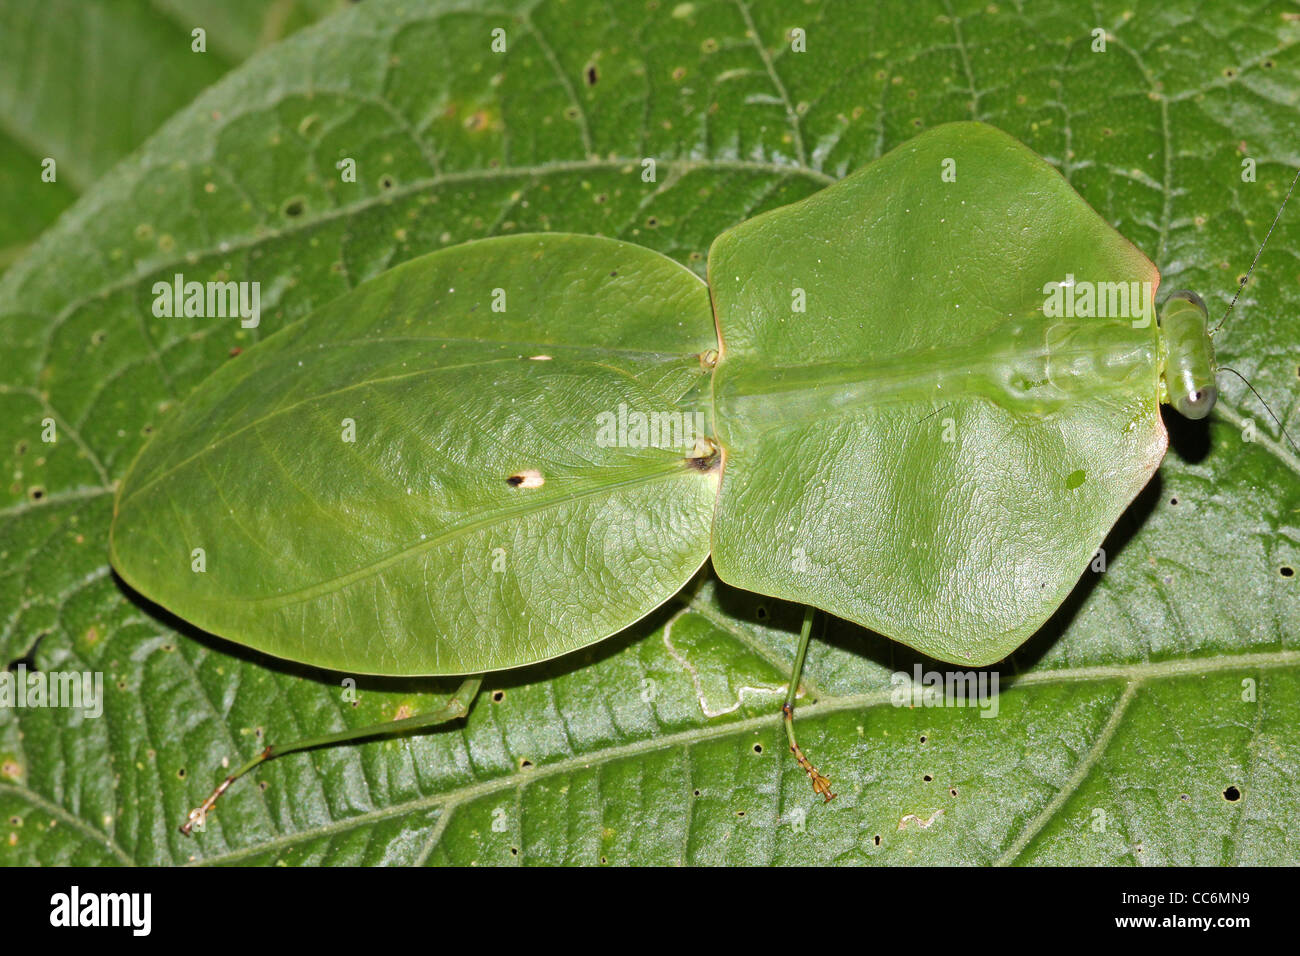 A Shield Mantis, Hood Mantis (or Hooded Mantis), or Leaf Mantis (or Leafy Mantis) in the Peruvian Amazon Amazing camouflage! Stock Photo